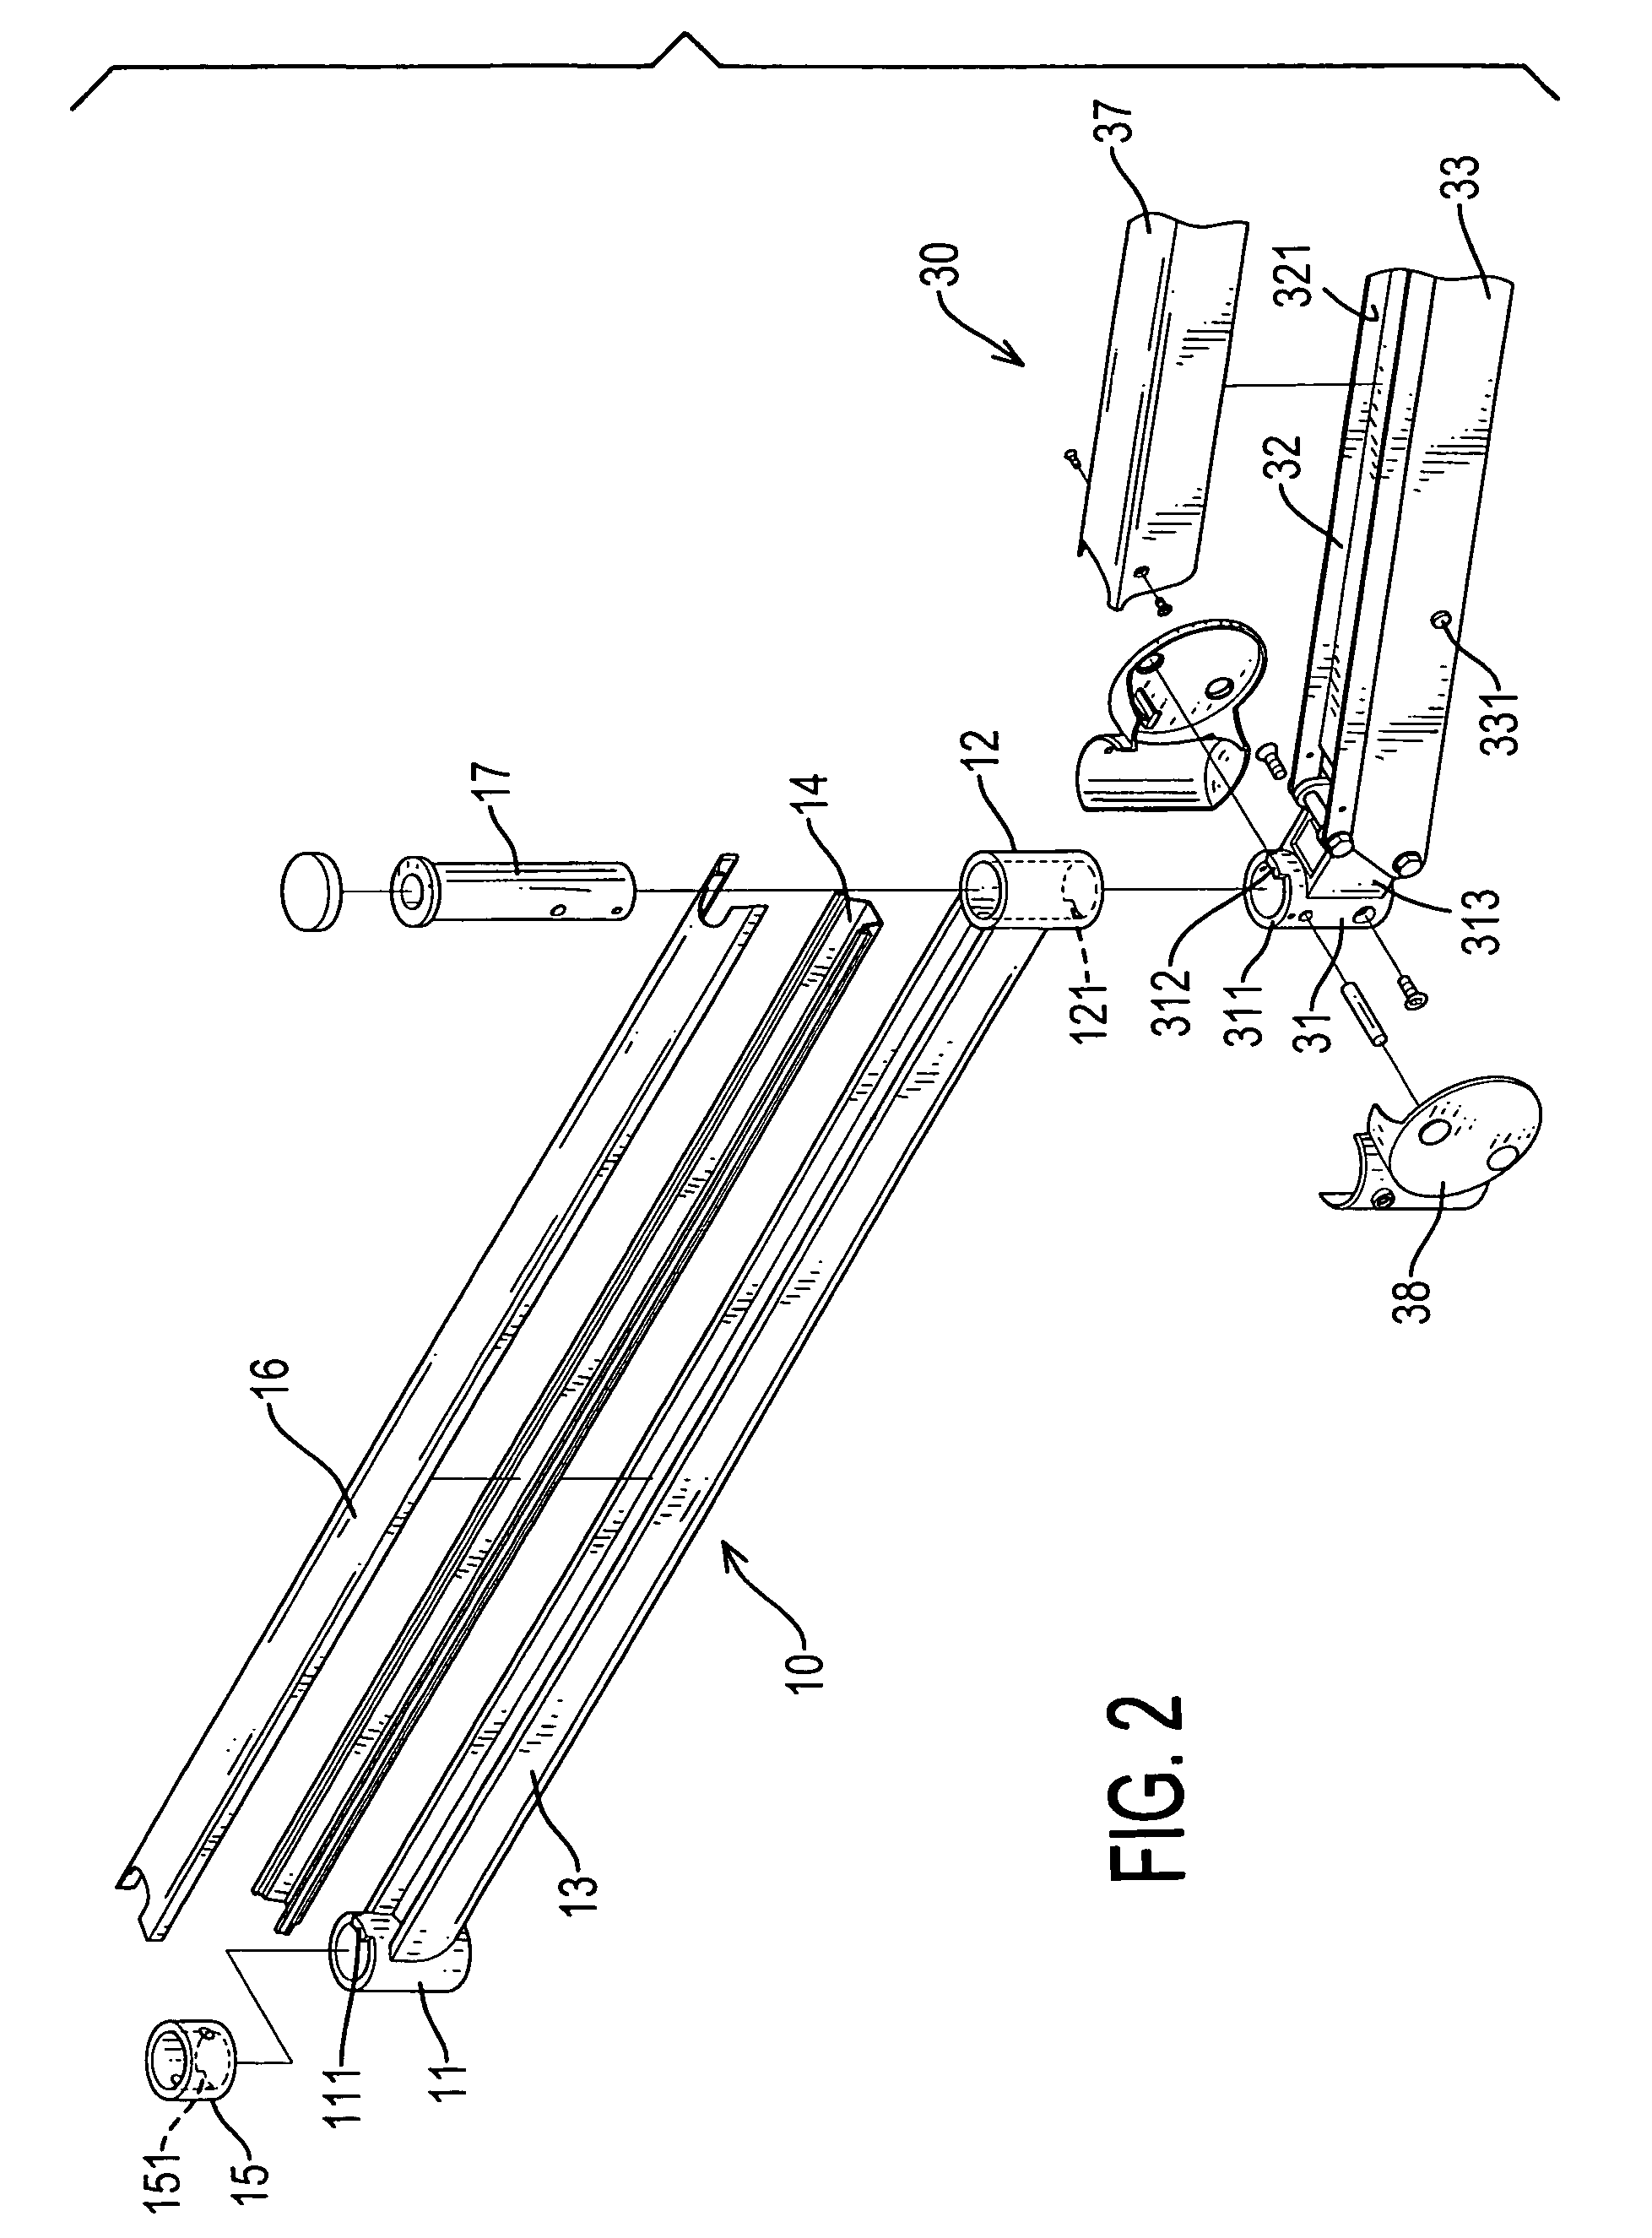 Support apparatus for suspending a display